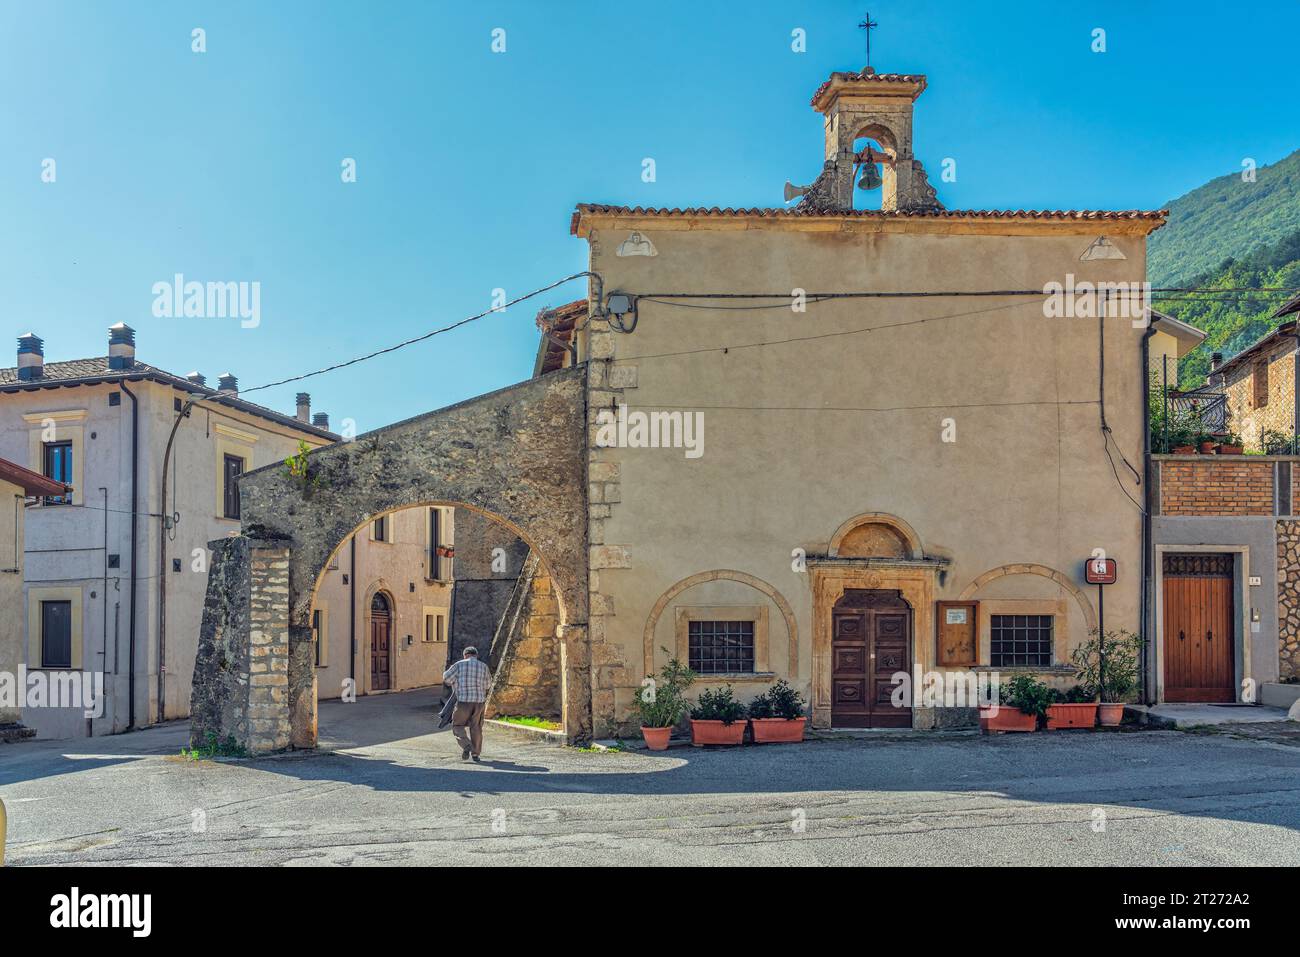 The Church of S. Rocco from the 11th century, with a characteristic arch with two supporting spurs. Above the facade is the small bell tower. Abruzzo Stock Photo